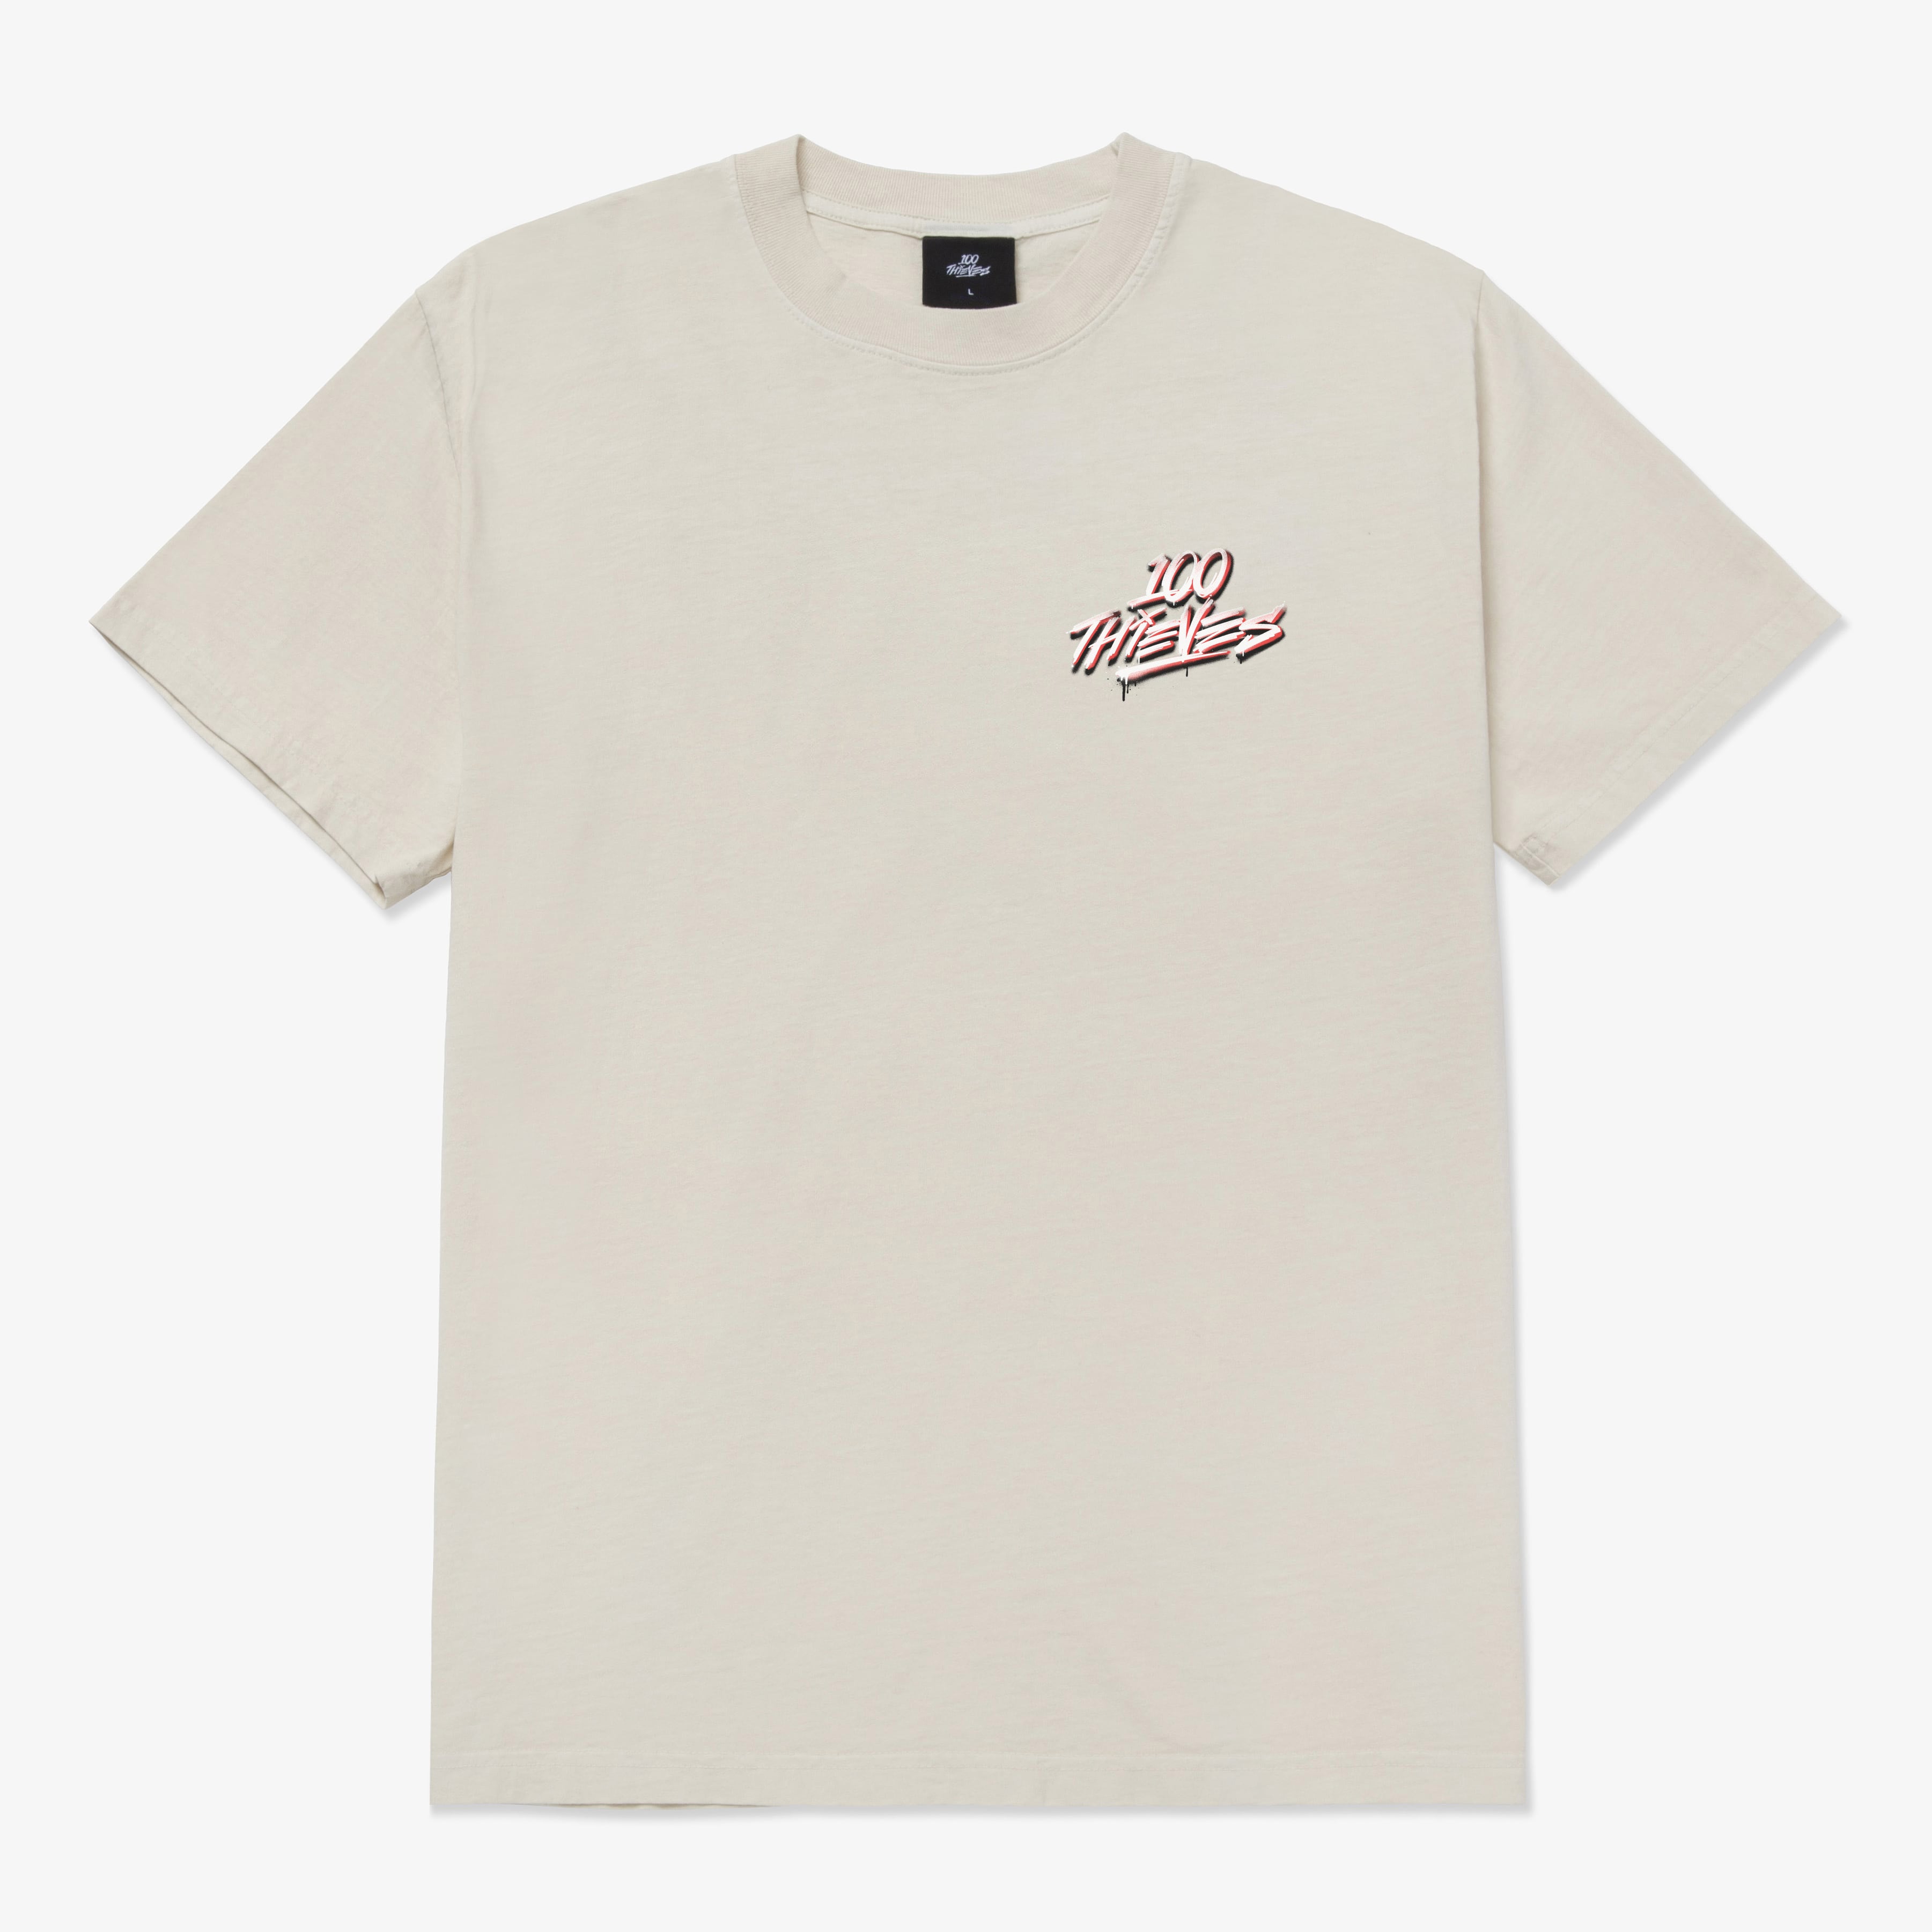 T-Shirt & Skin Set - Deluxe Edition | 100 Thieves VCT Team Capsule